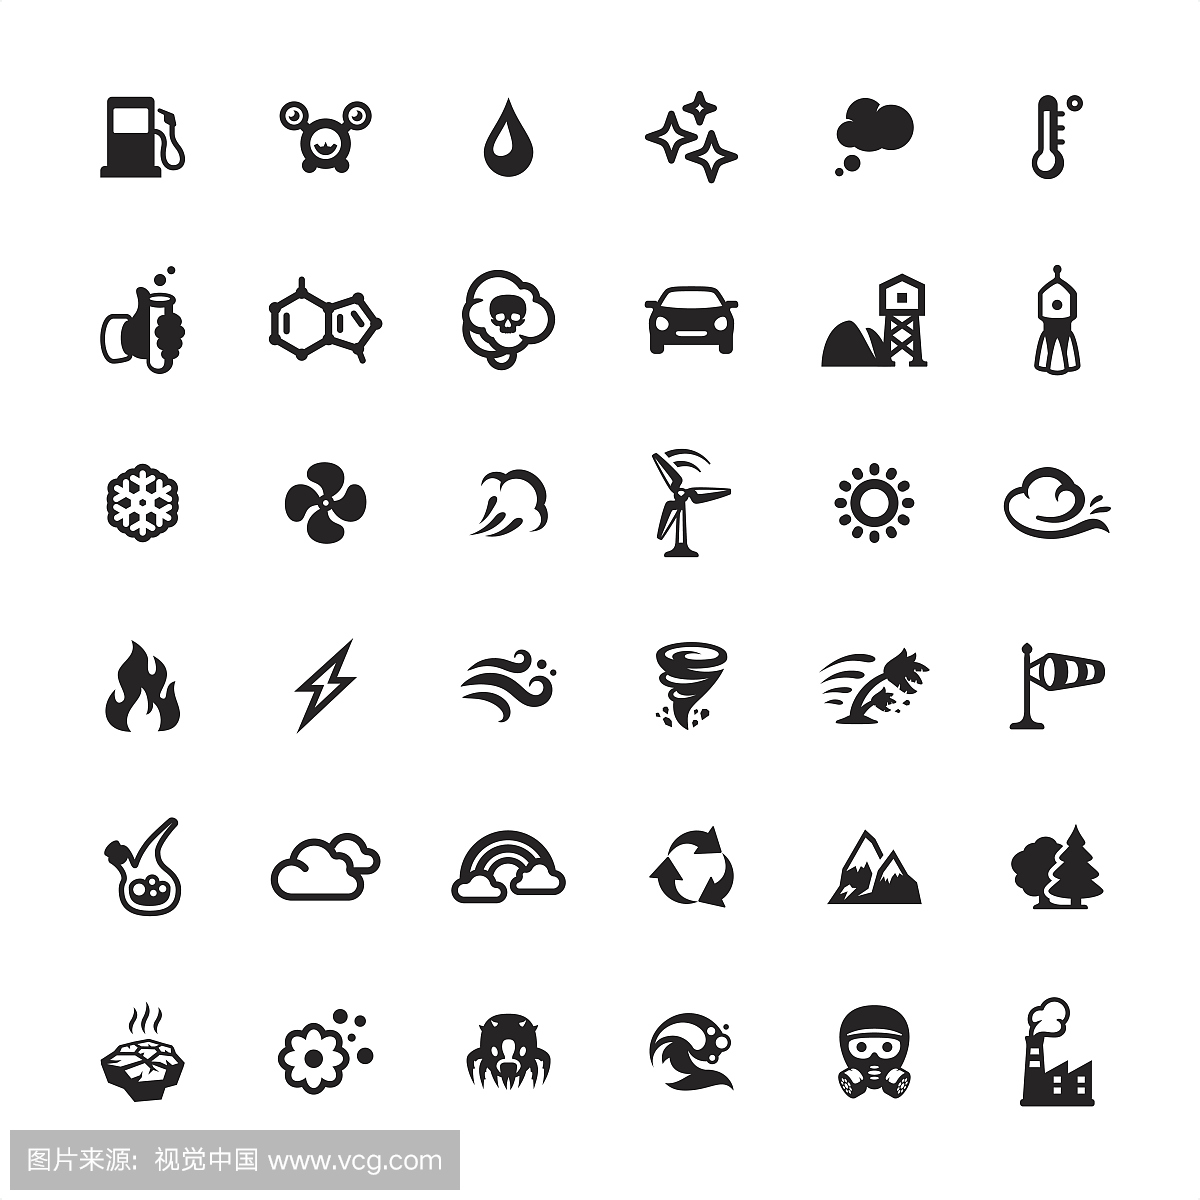 Air Purifier and Pollution icons set